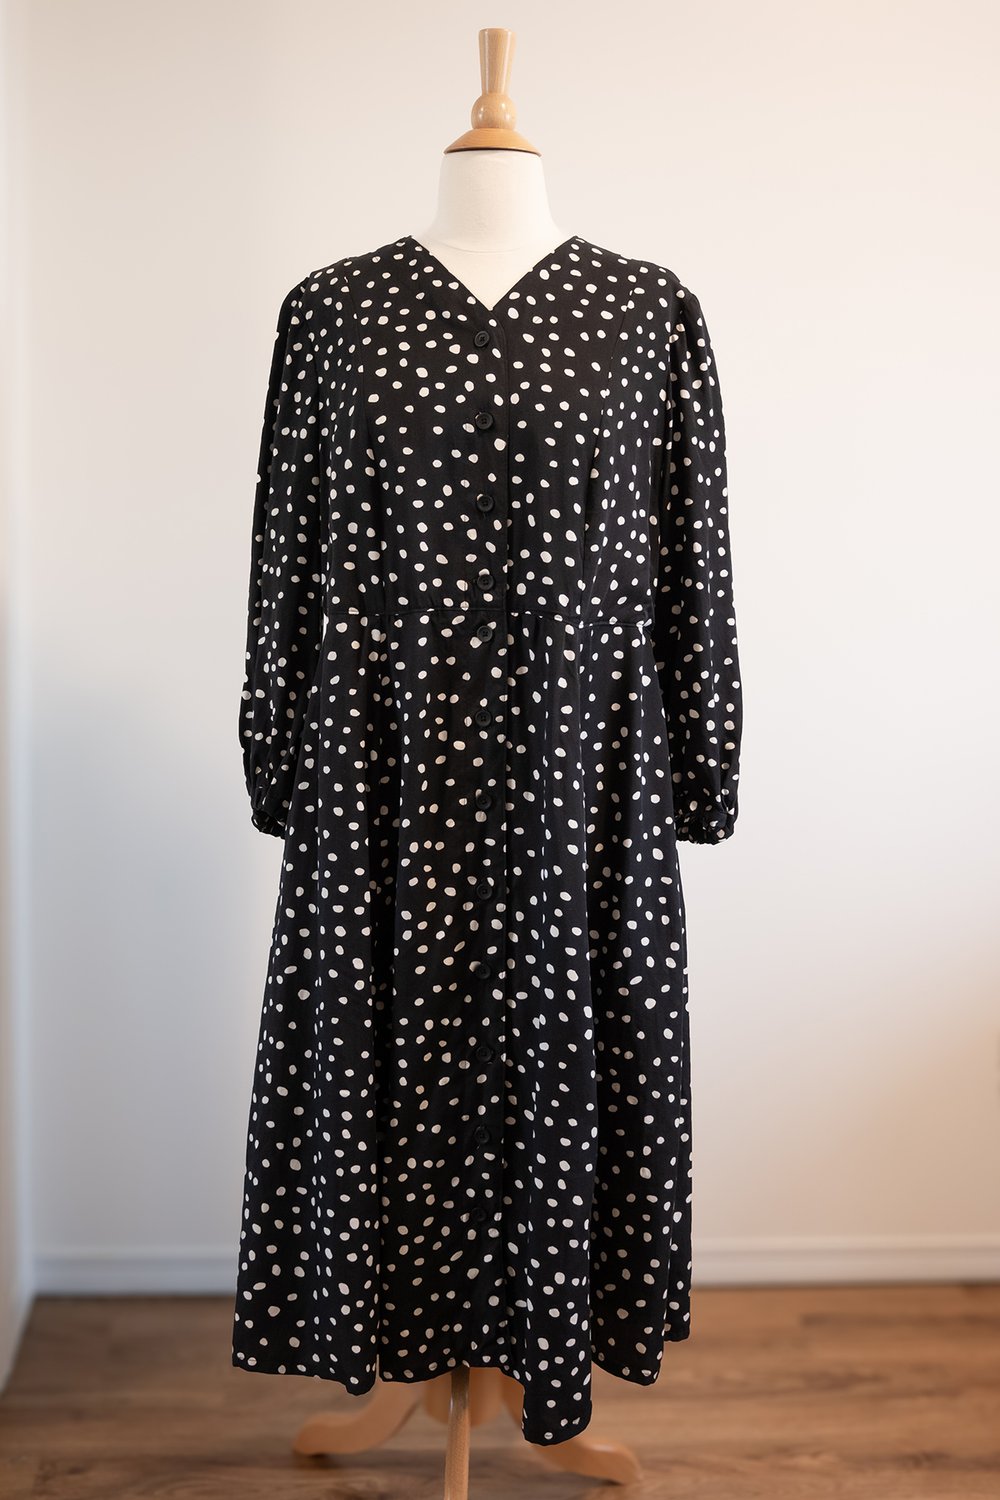 A black and white polka dot dress is on a dress form; the dress is made out of lyocell fabric and has a drape.